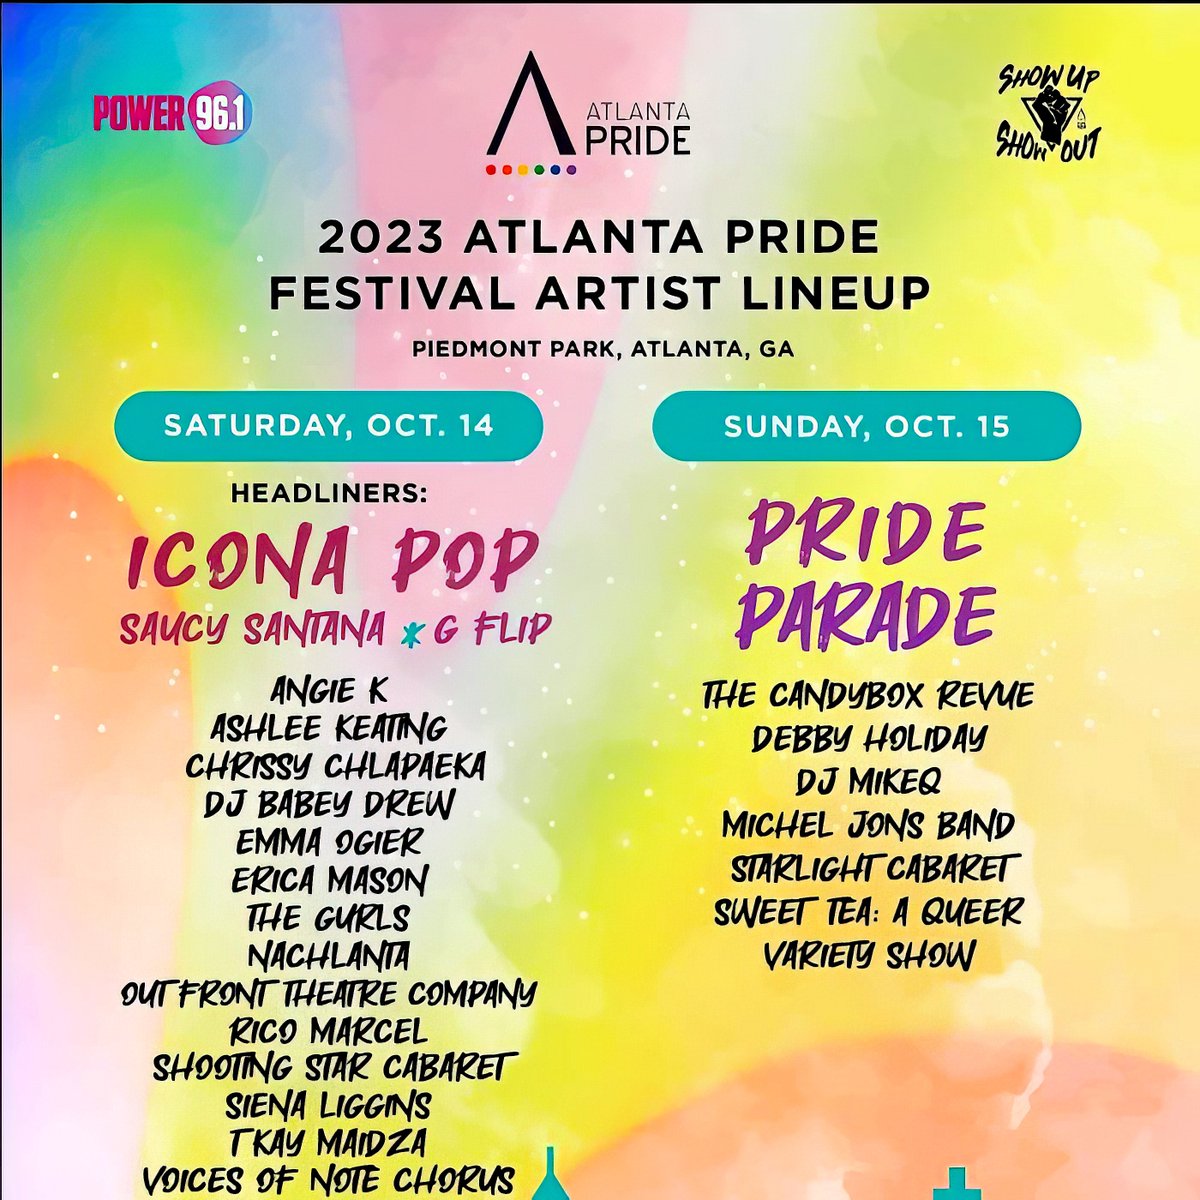 ATLANTA PRIDE COMMITTEE ANNOUNCES ENTERTAINMENT LINEUP FOR 2023 ATLANTA PRIDE FESTIVAL OCTOBER 14 & 15. Sunday, the Starlight Cabaret will close out the weekend with the largest outdoor #dragshow in the country. #StarlightCabaret #AtlantaPride2023 #AtlantaPride #ShowUpShowOut